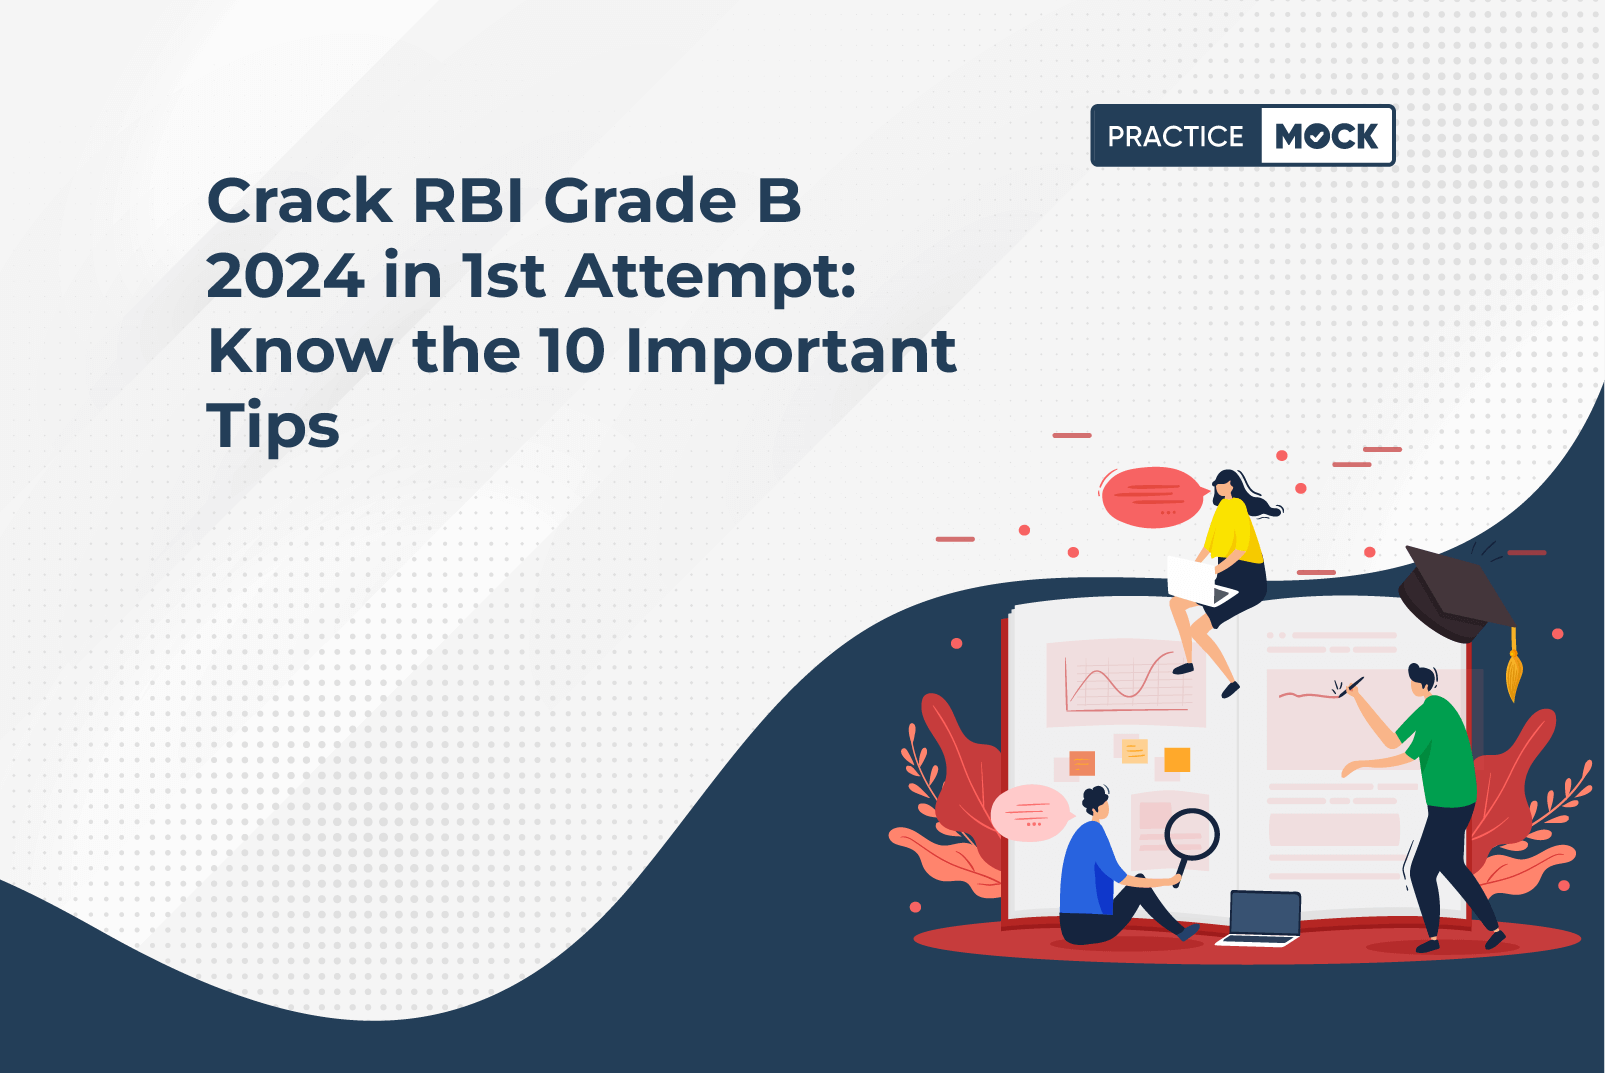 Crack RBI Grade B 2024 in 1st Attempt Know the 10 Important Tips